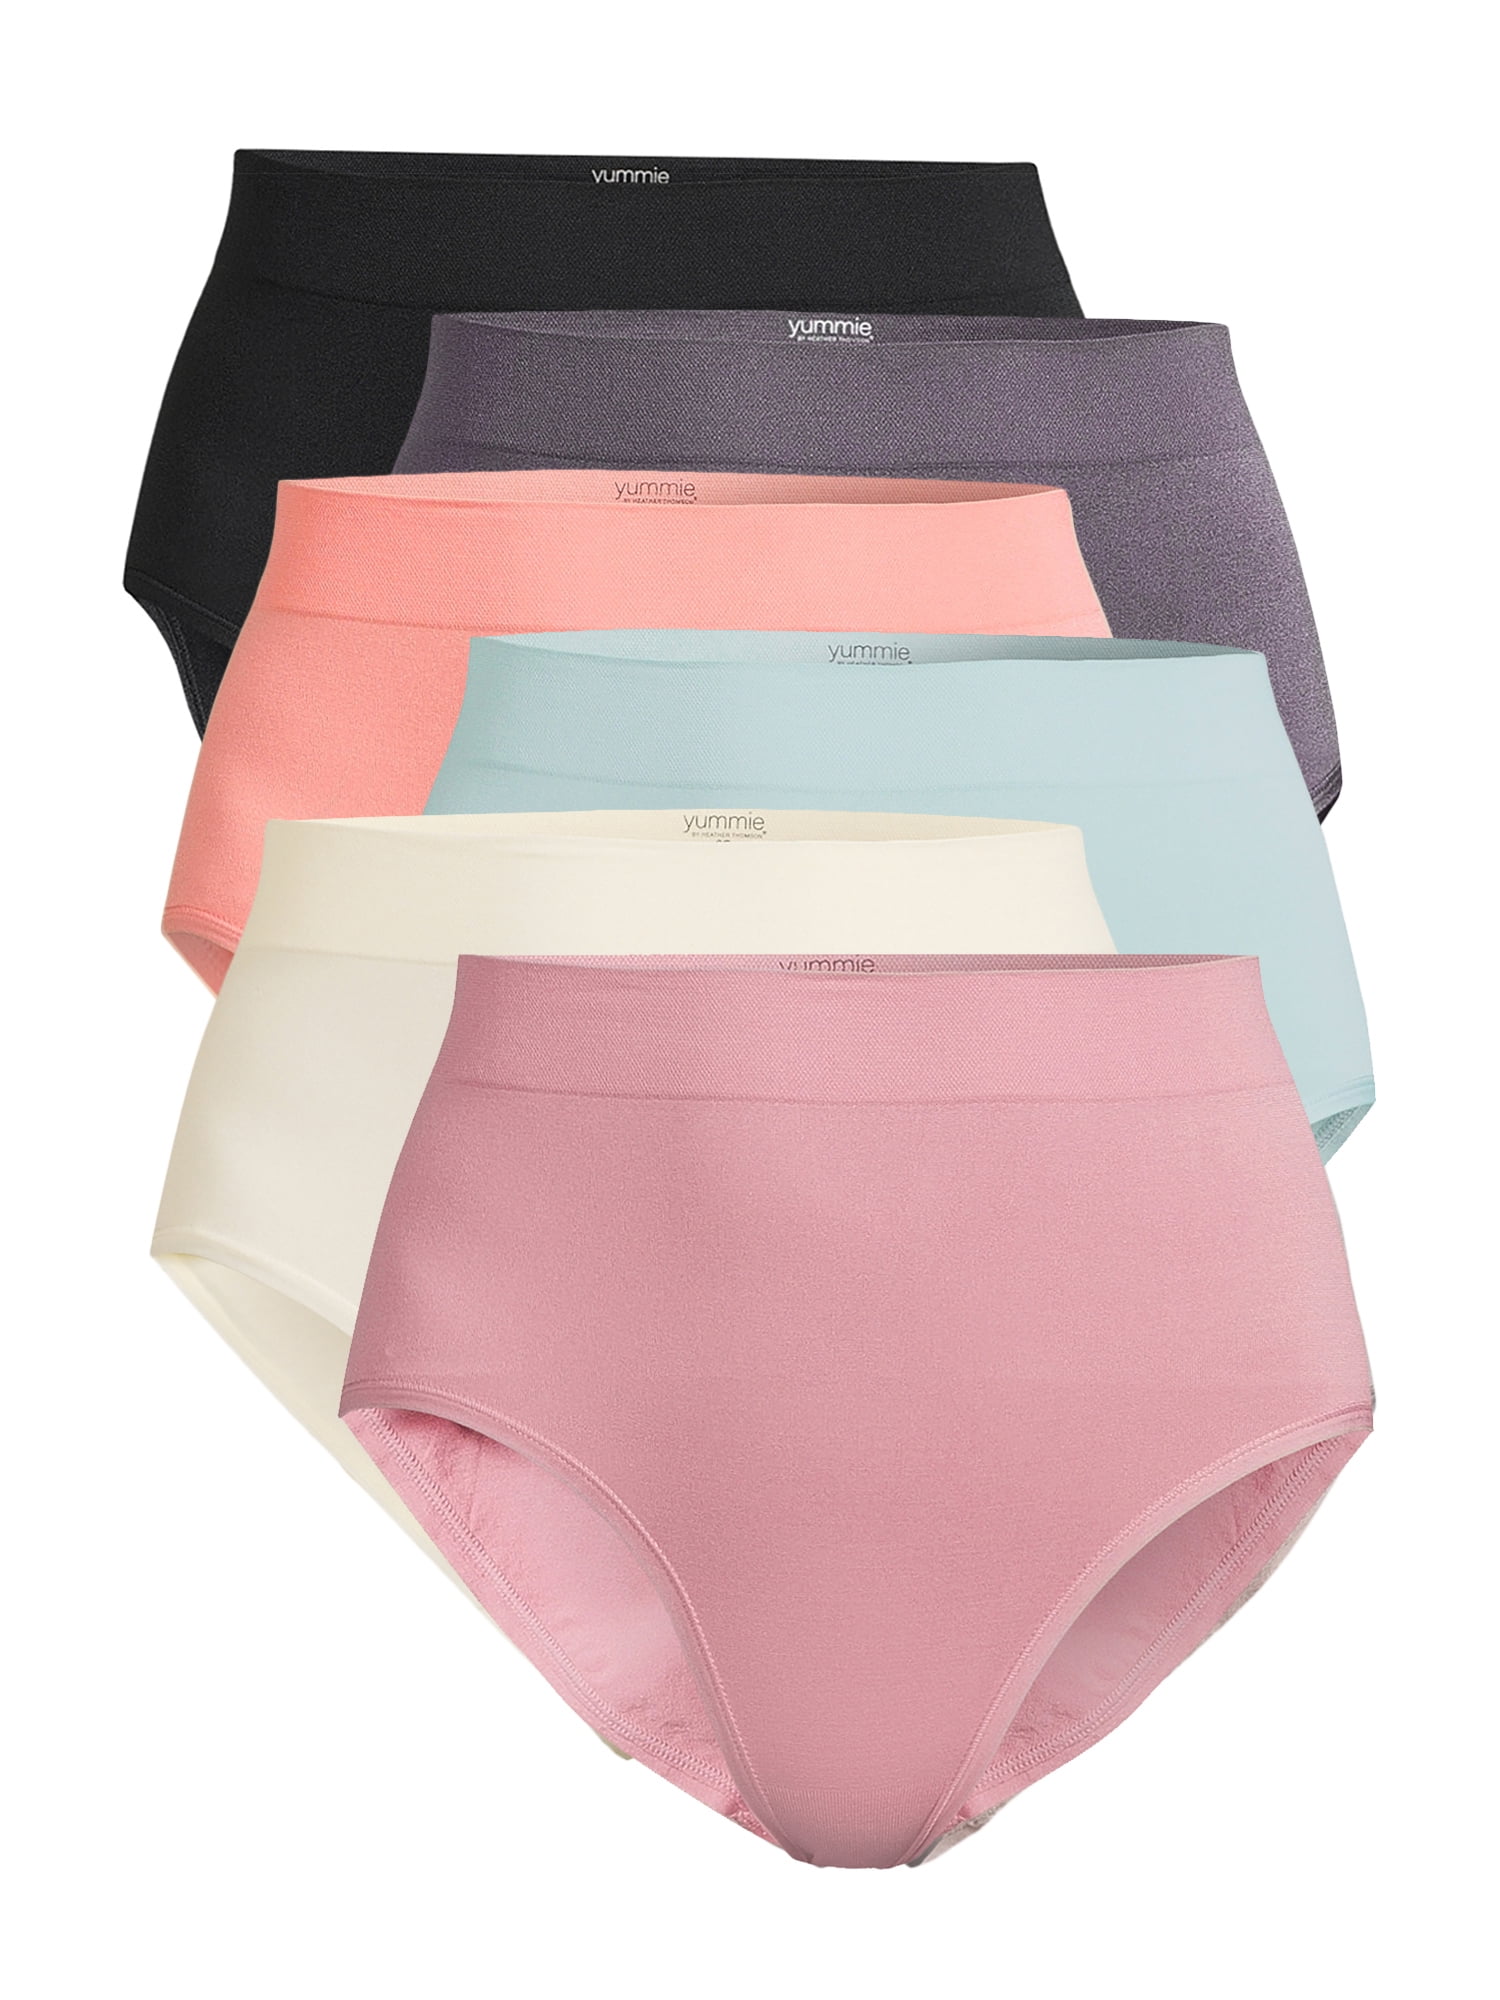 Yummie by Heather Thomson Women's Seamless Brief Panties, 6 Pack ...